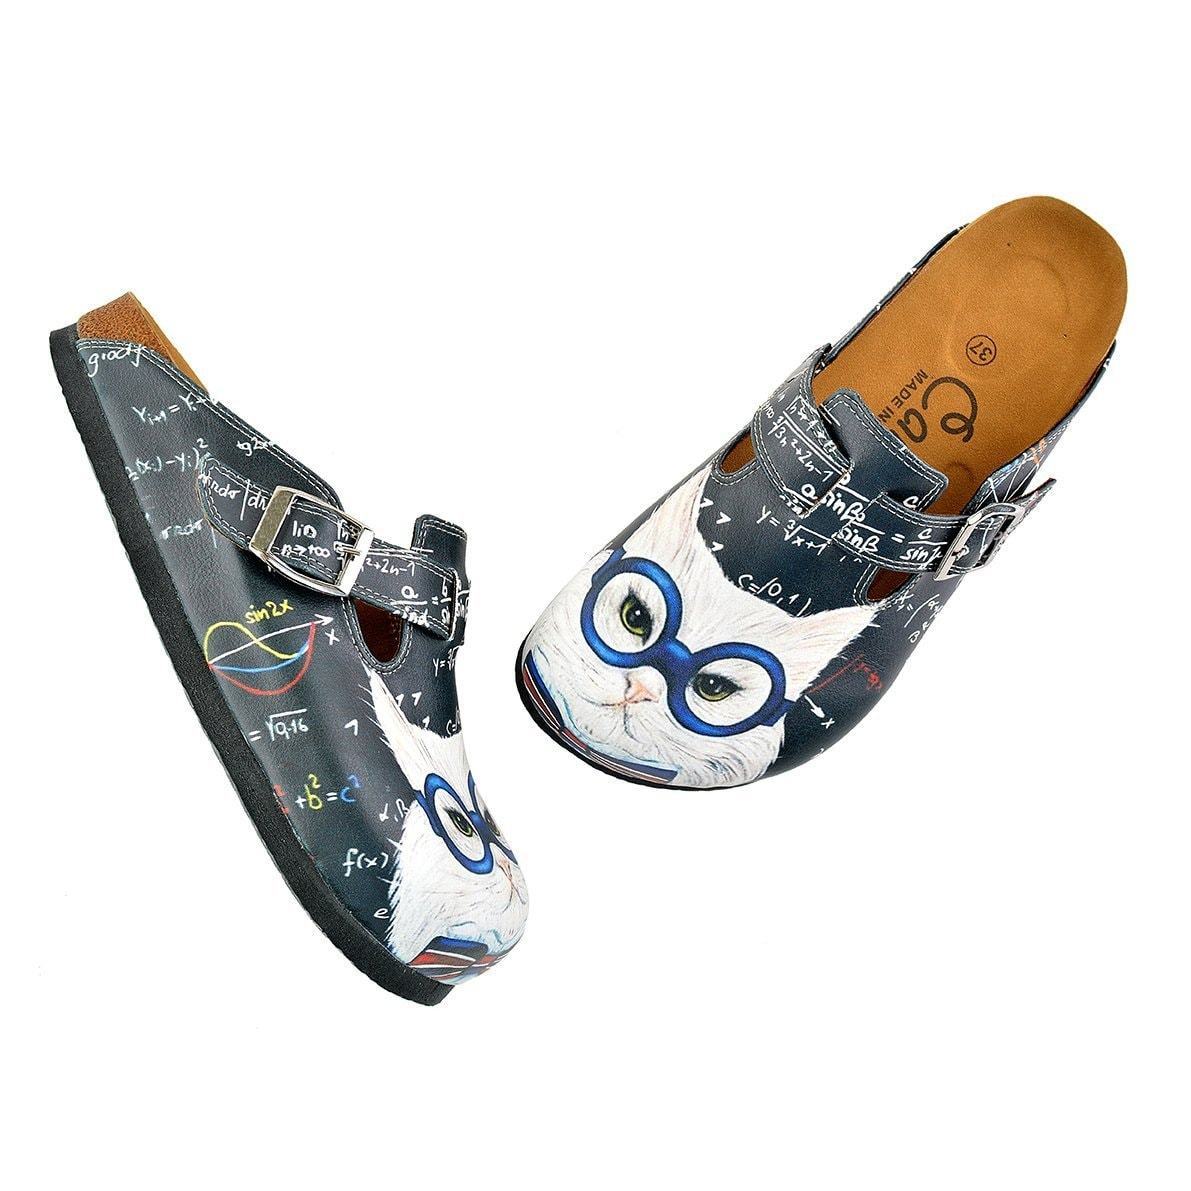 White & Gray Cat Clogs WCAL343 (737670332512)